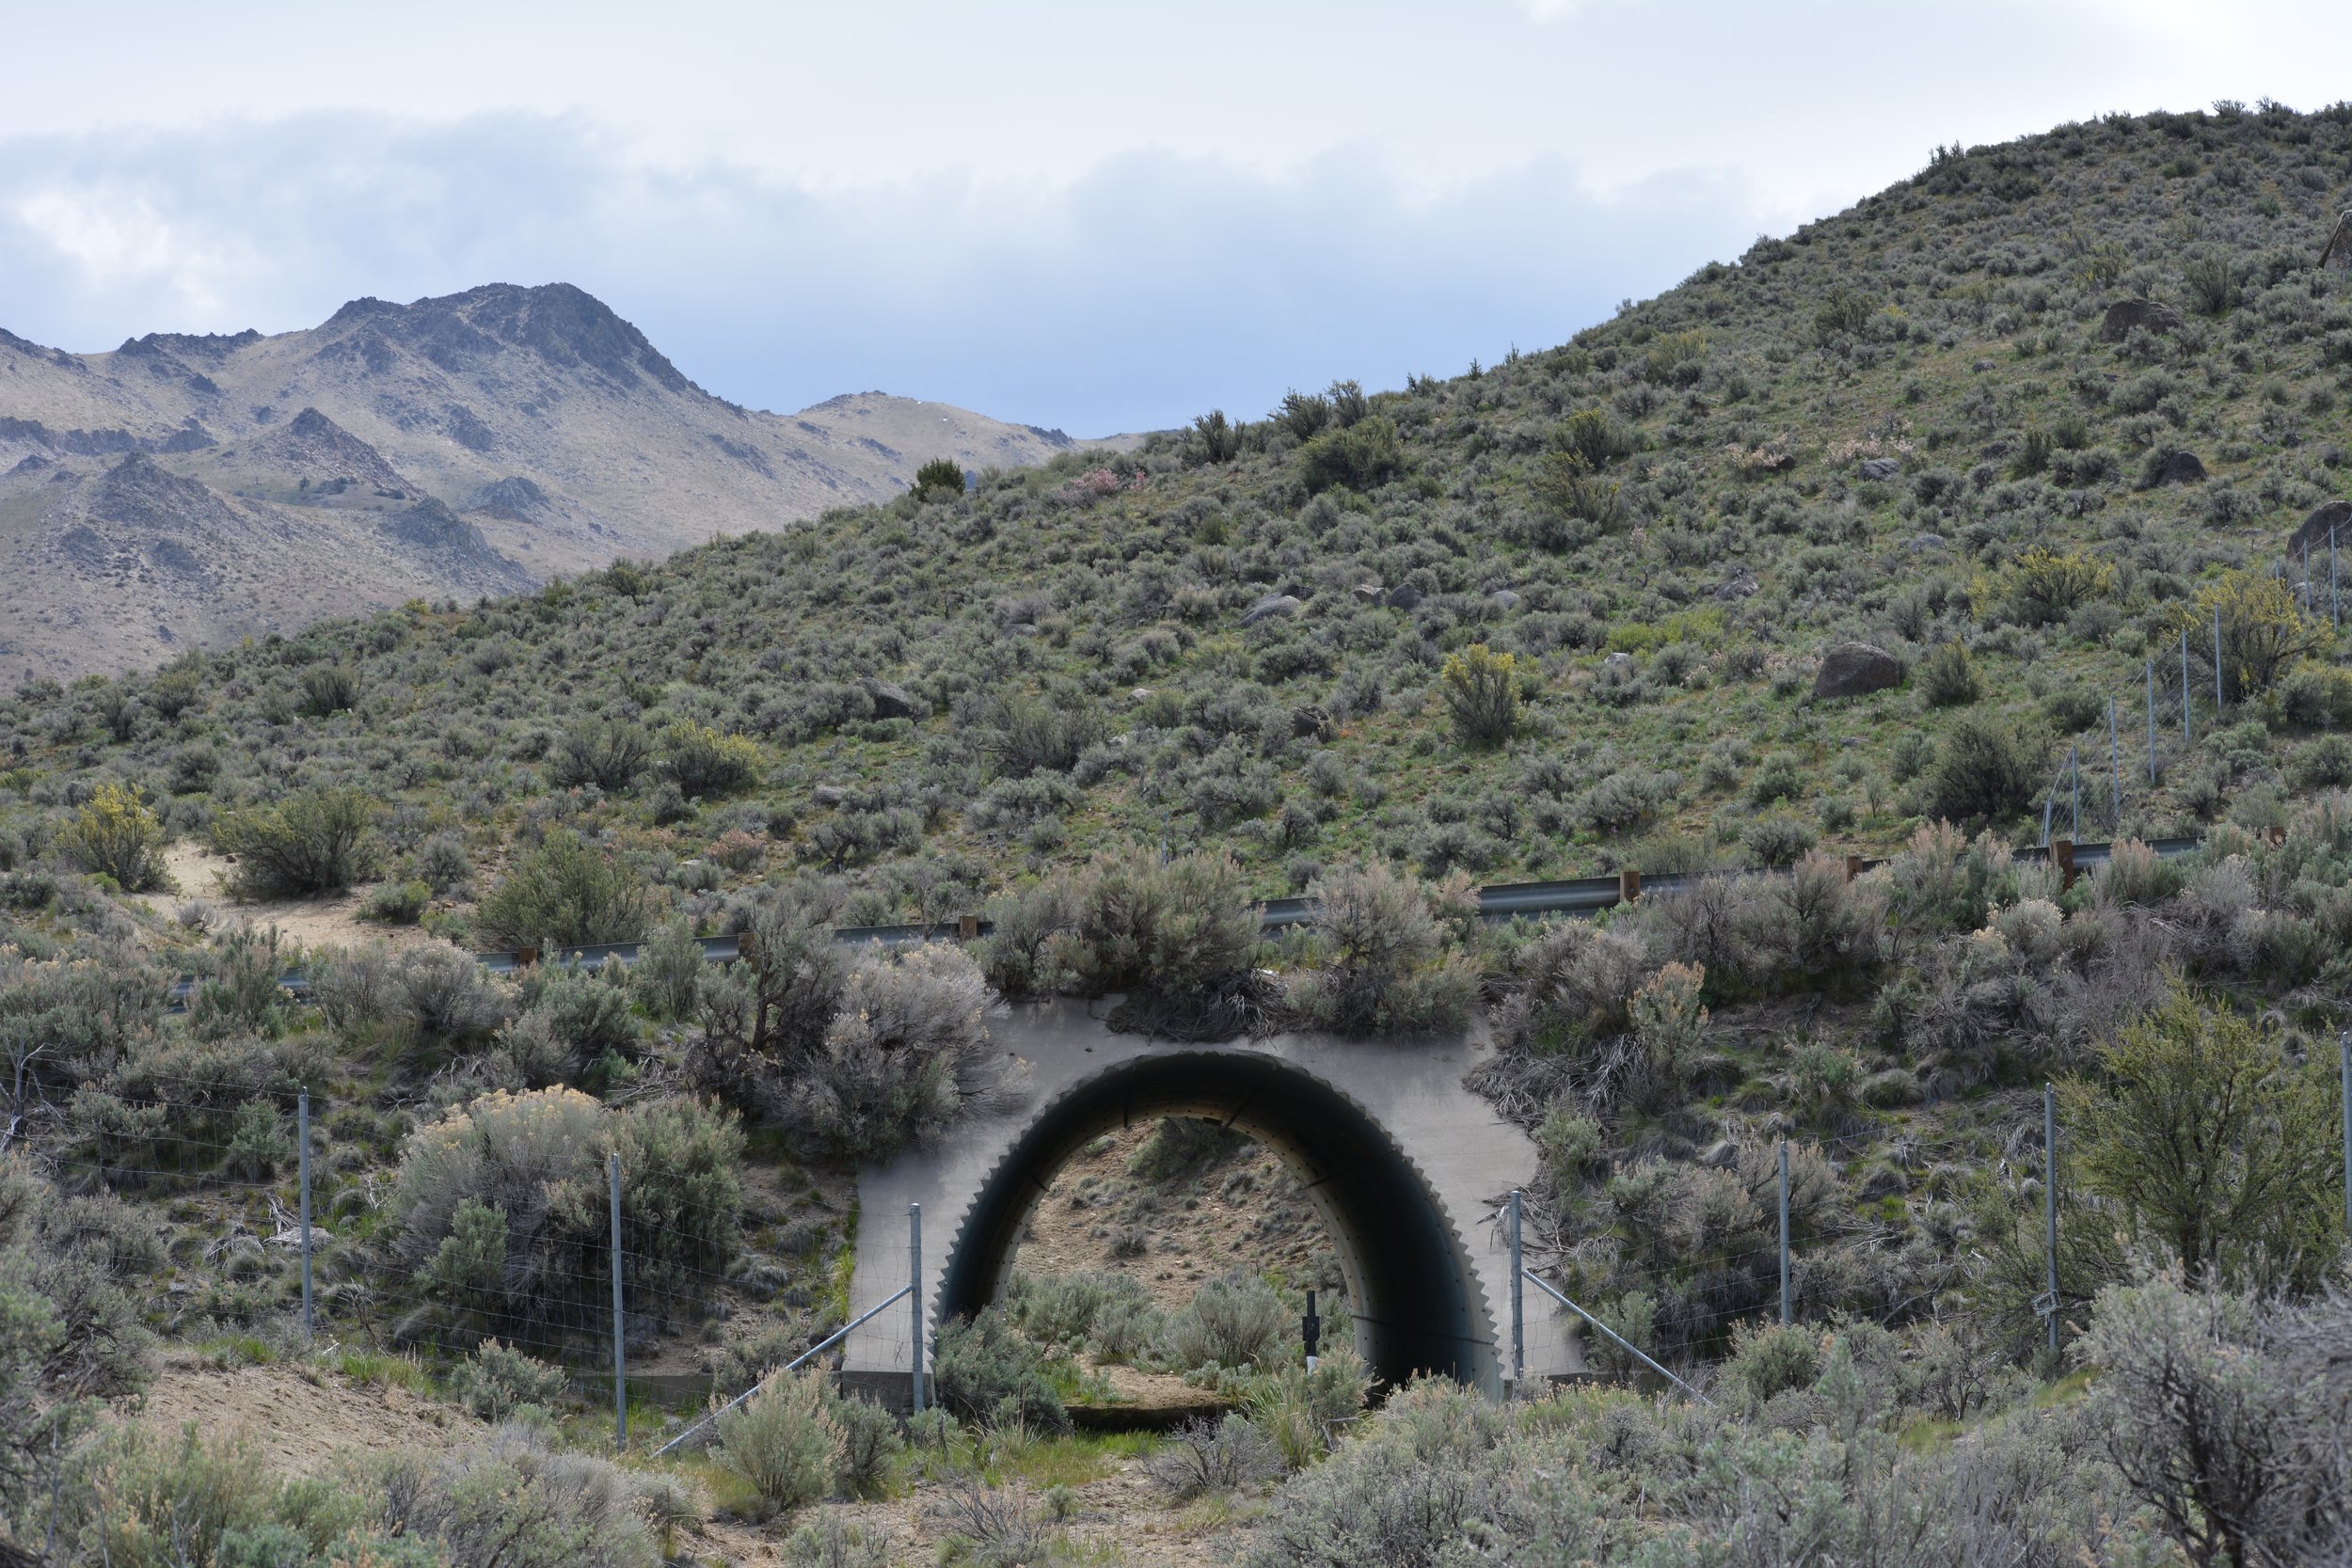  Several large underpasses on Highway 395 provide important safe passage for various species of wildlife, including mountain lion, bear, pronghorn, deer, and badgers. 